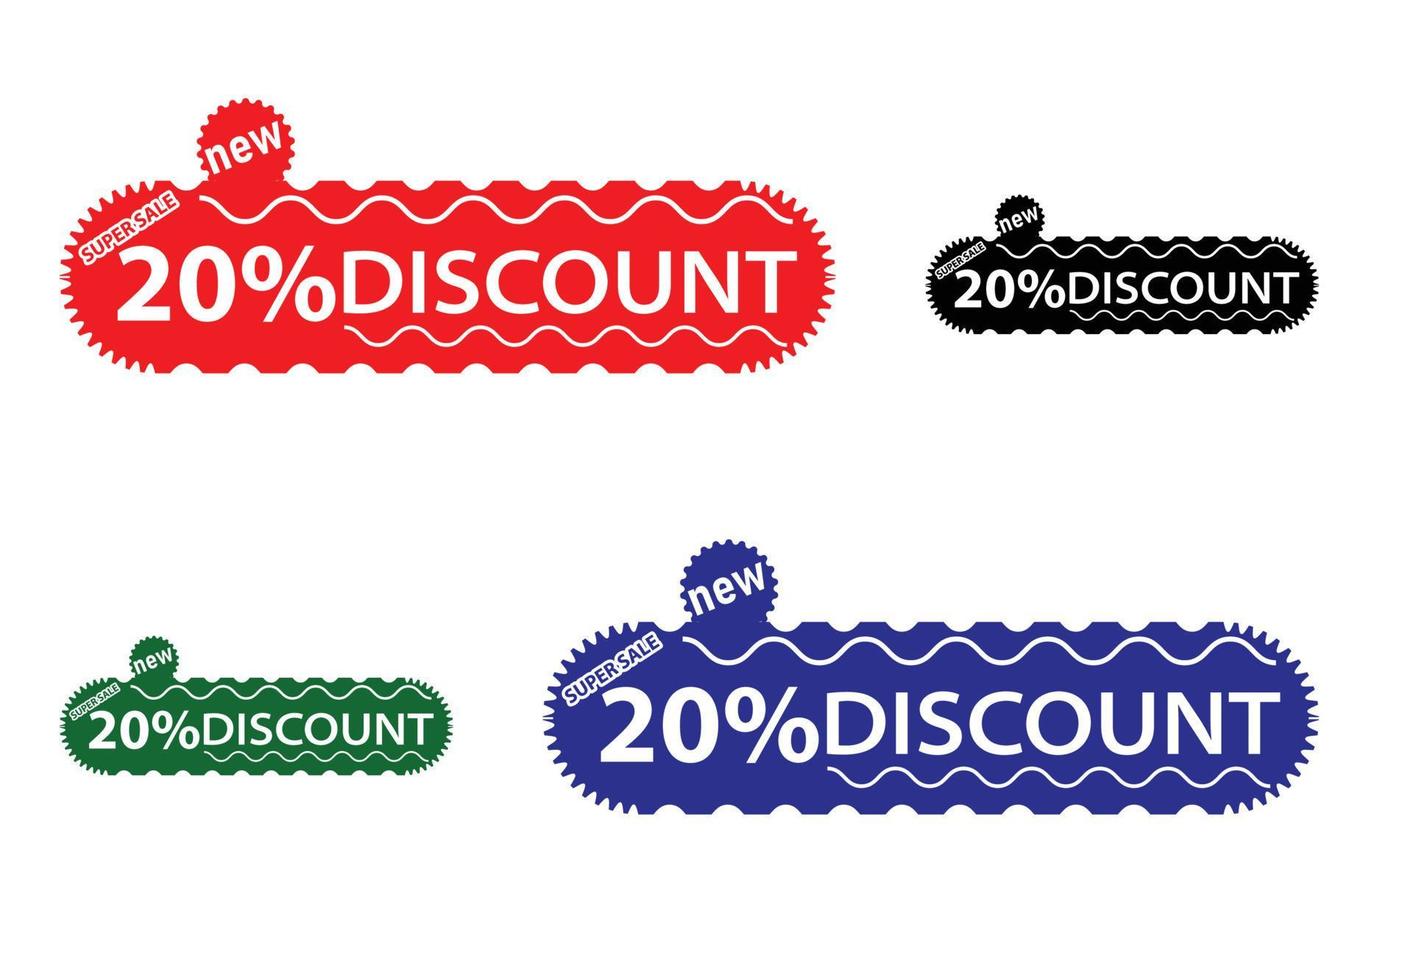 20 percent off new offer logo and icon design template vector